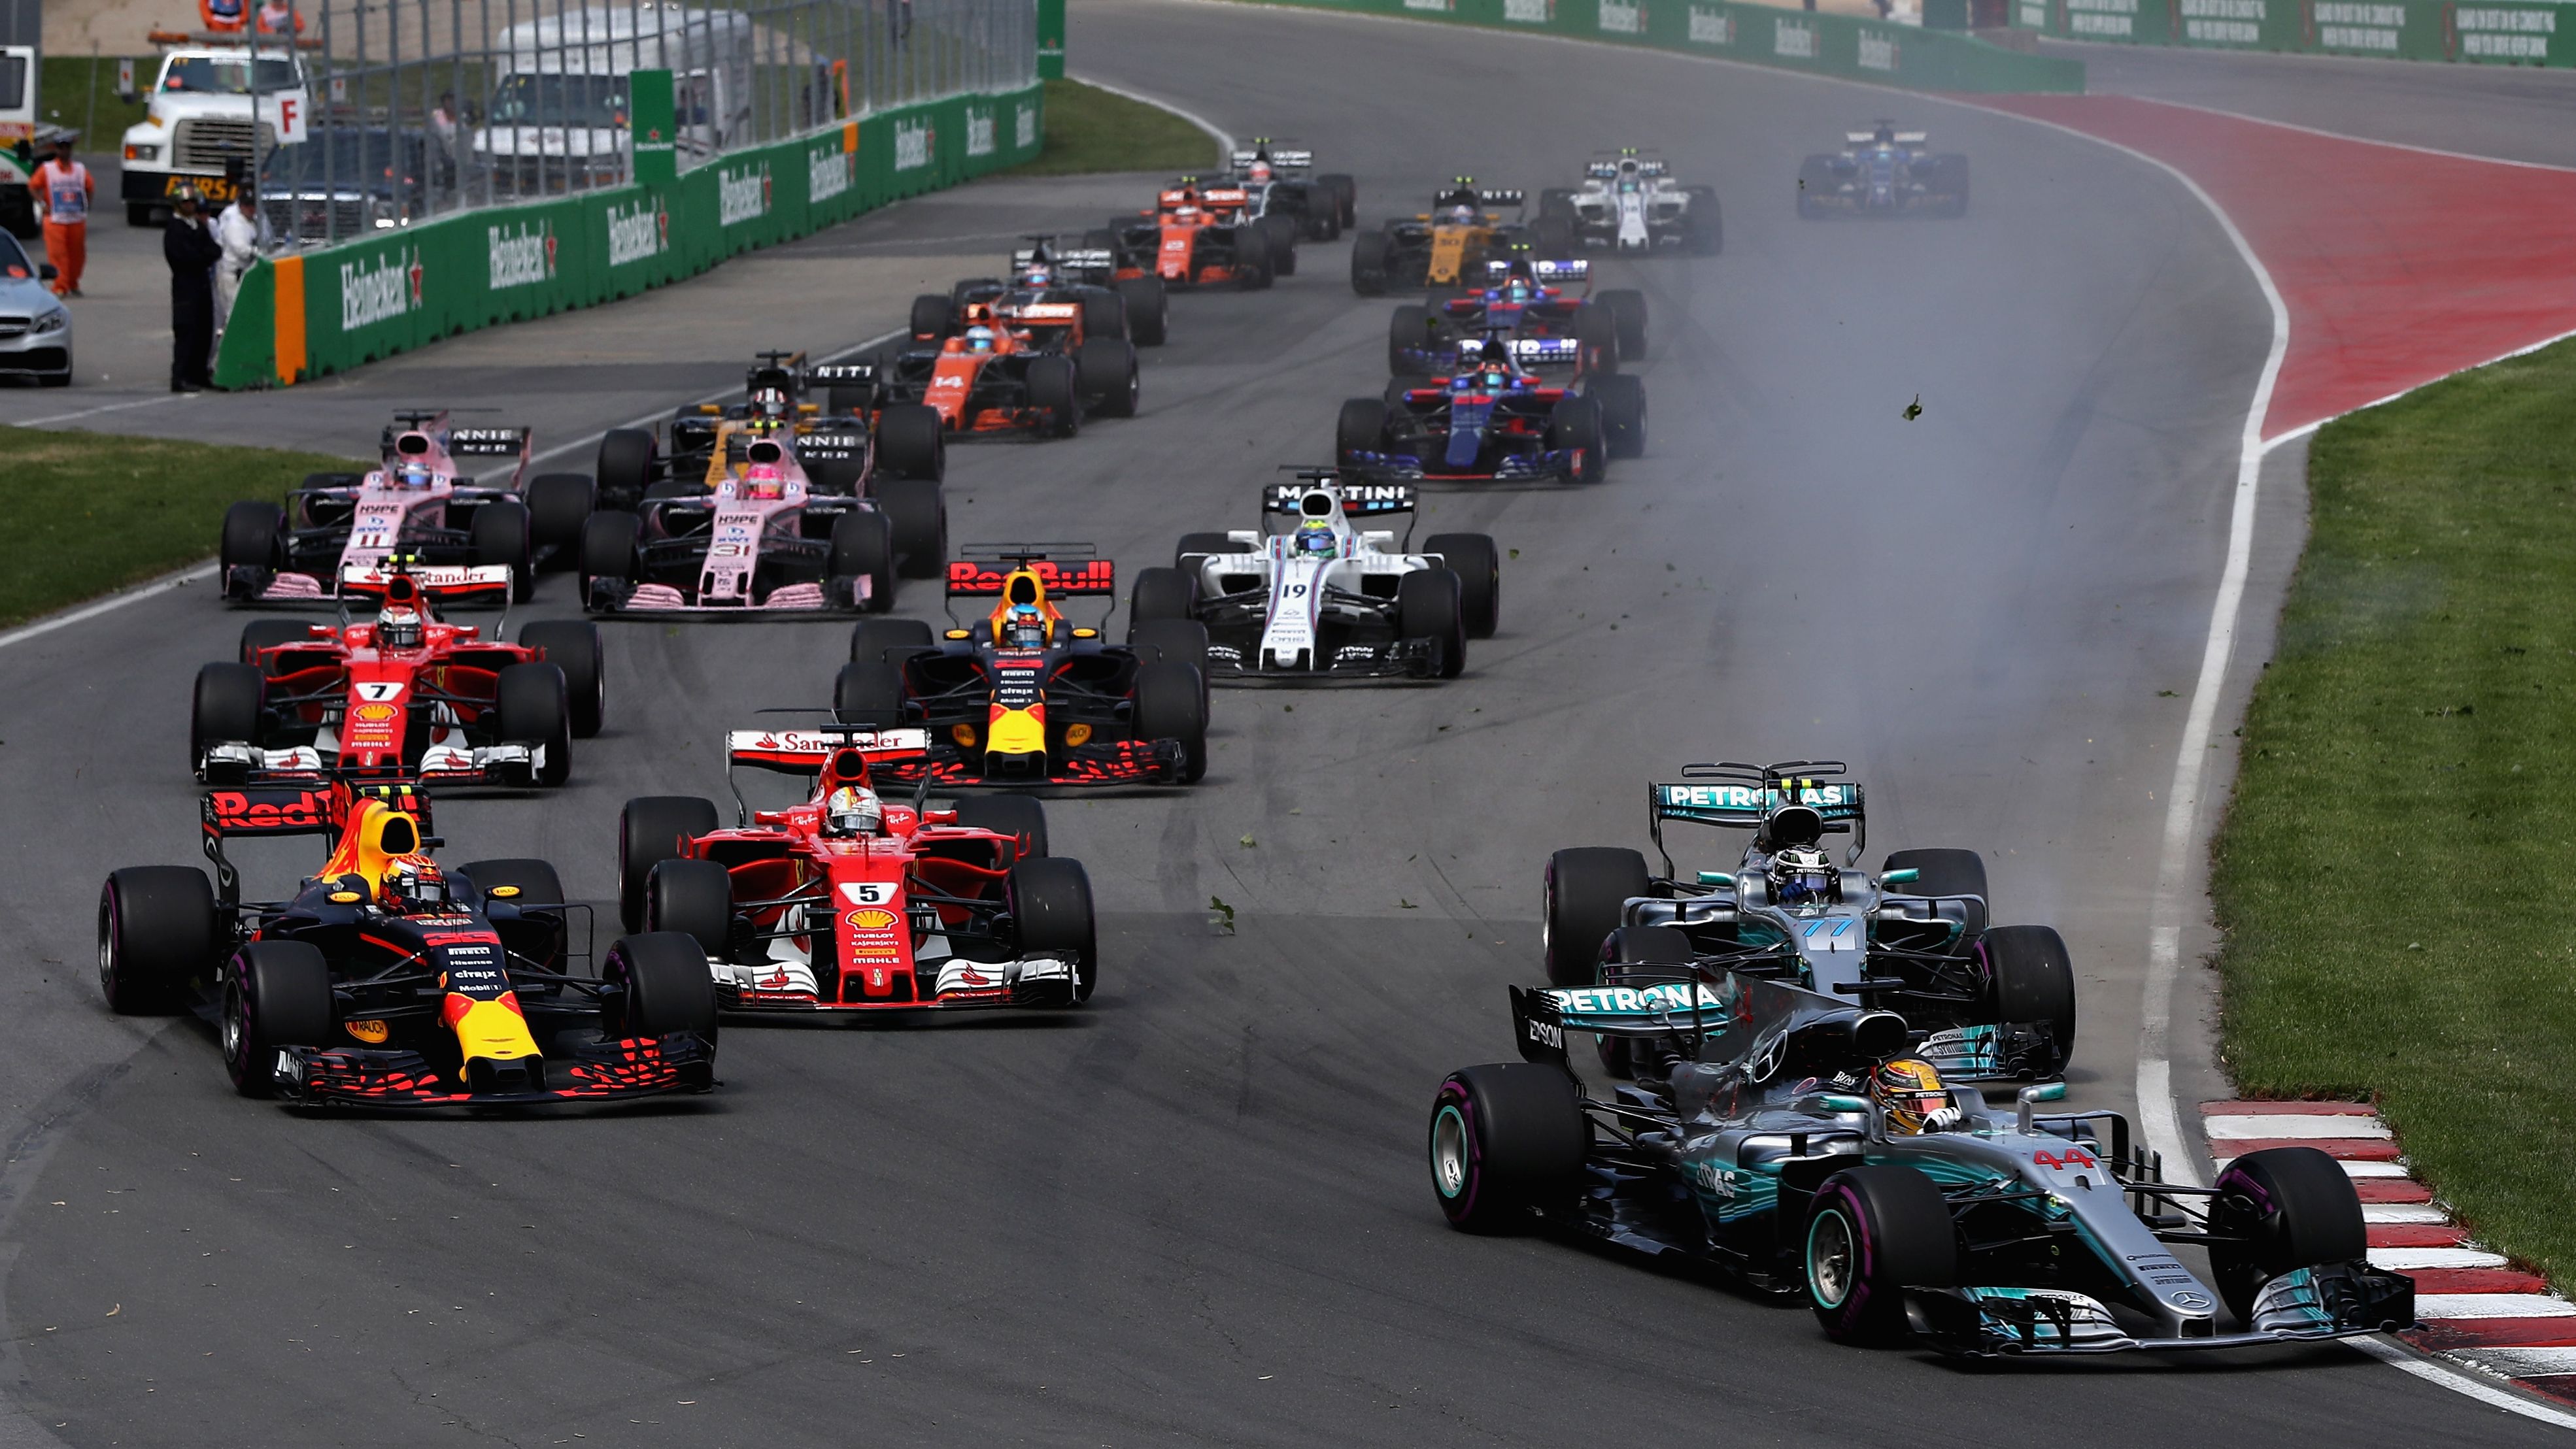 Lewis Hamilton (No. 44) leads into Turn One at the start of the Canadian Grand Prix.  